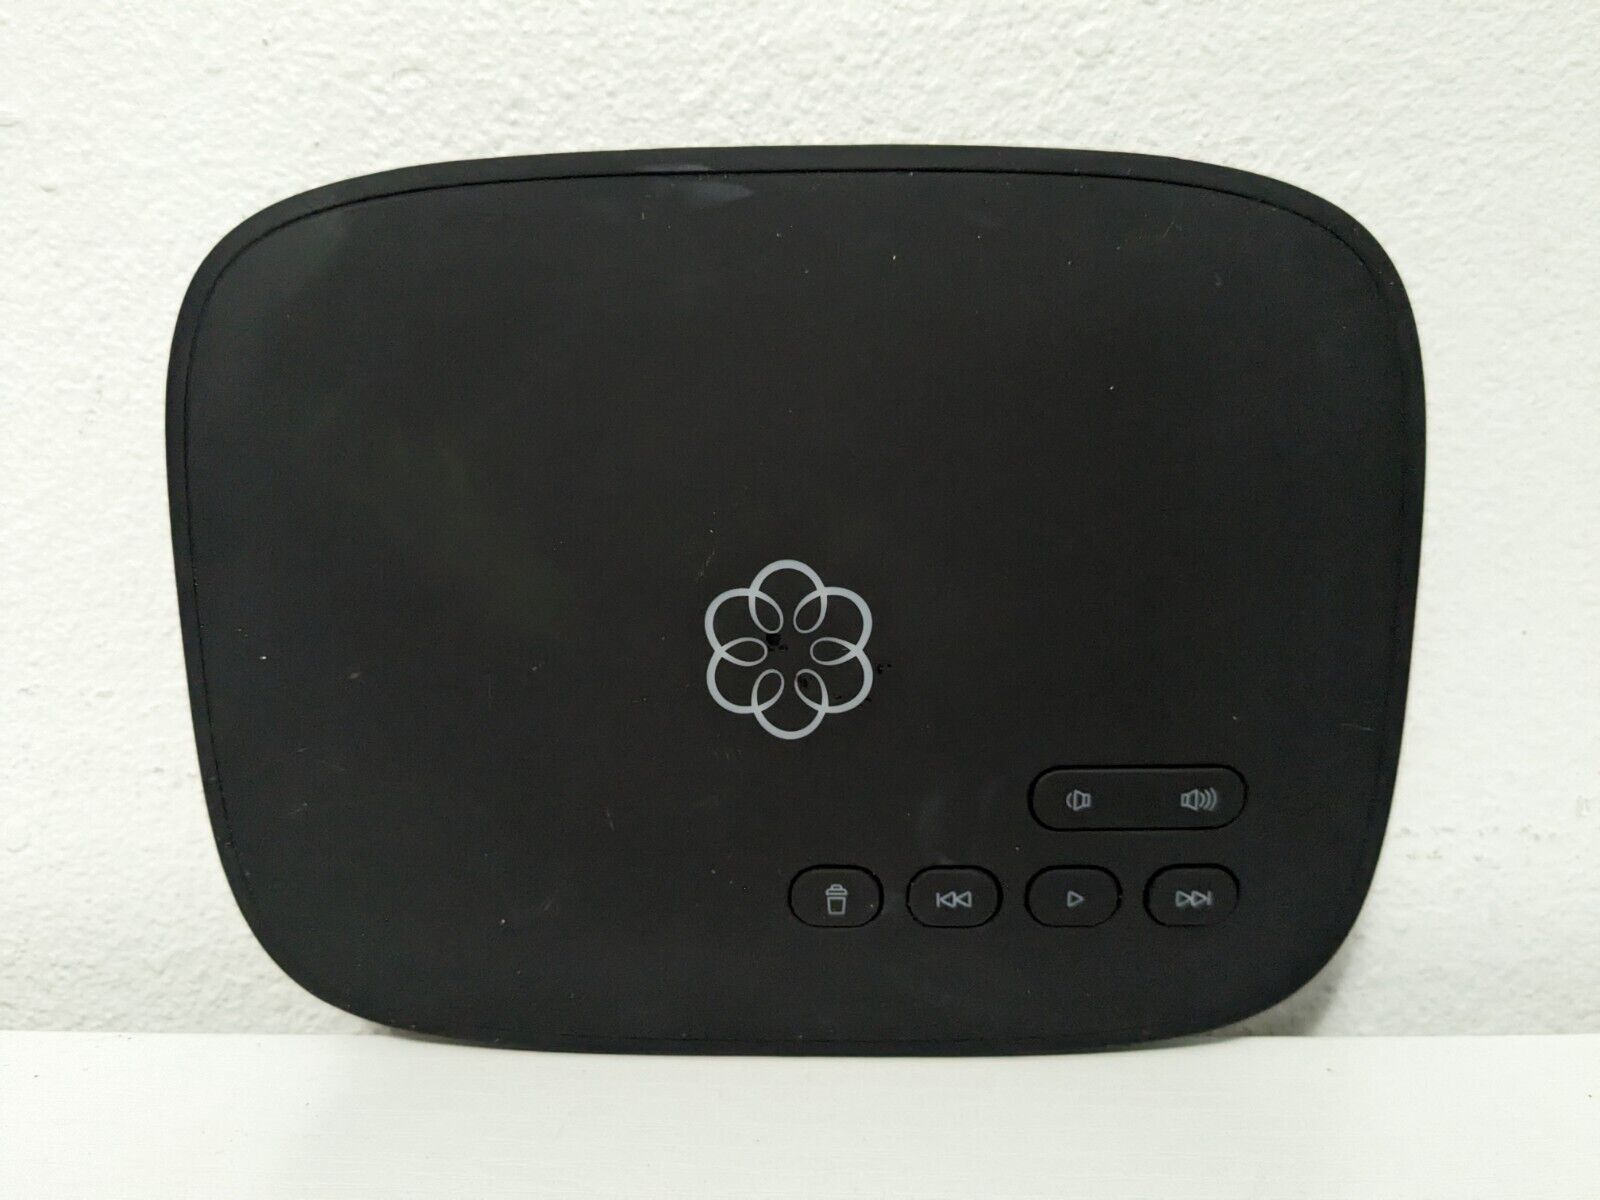 AS IS Ooma Telo Air 2 Smart Home Phone Base DEVICE ONLY Turns On Untested